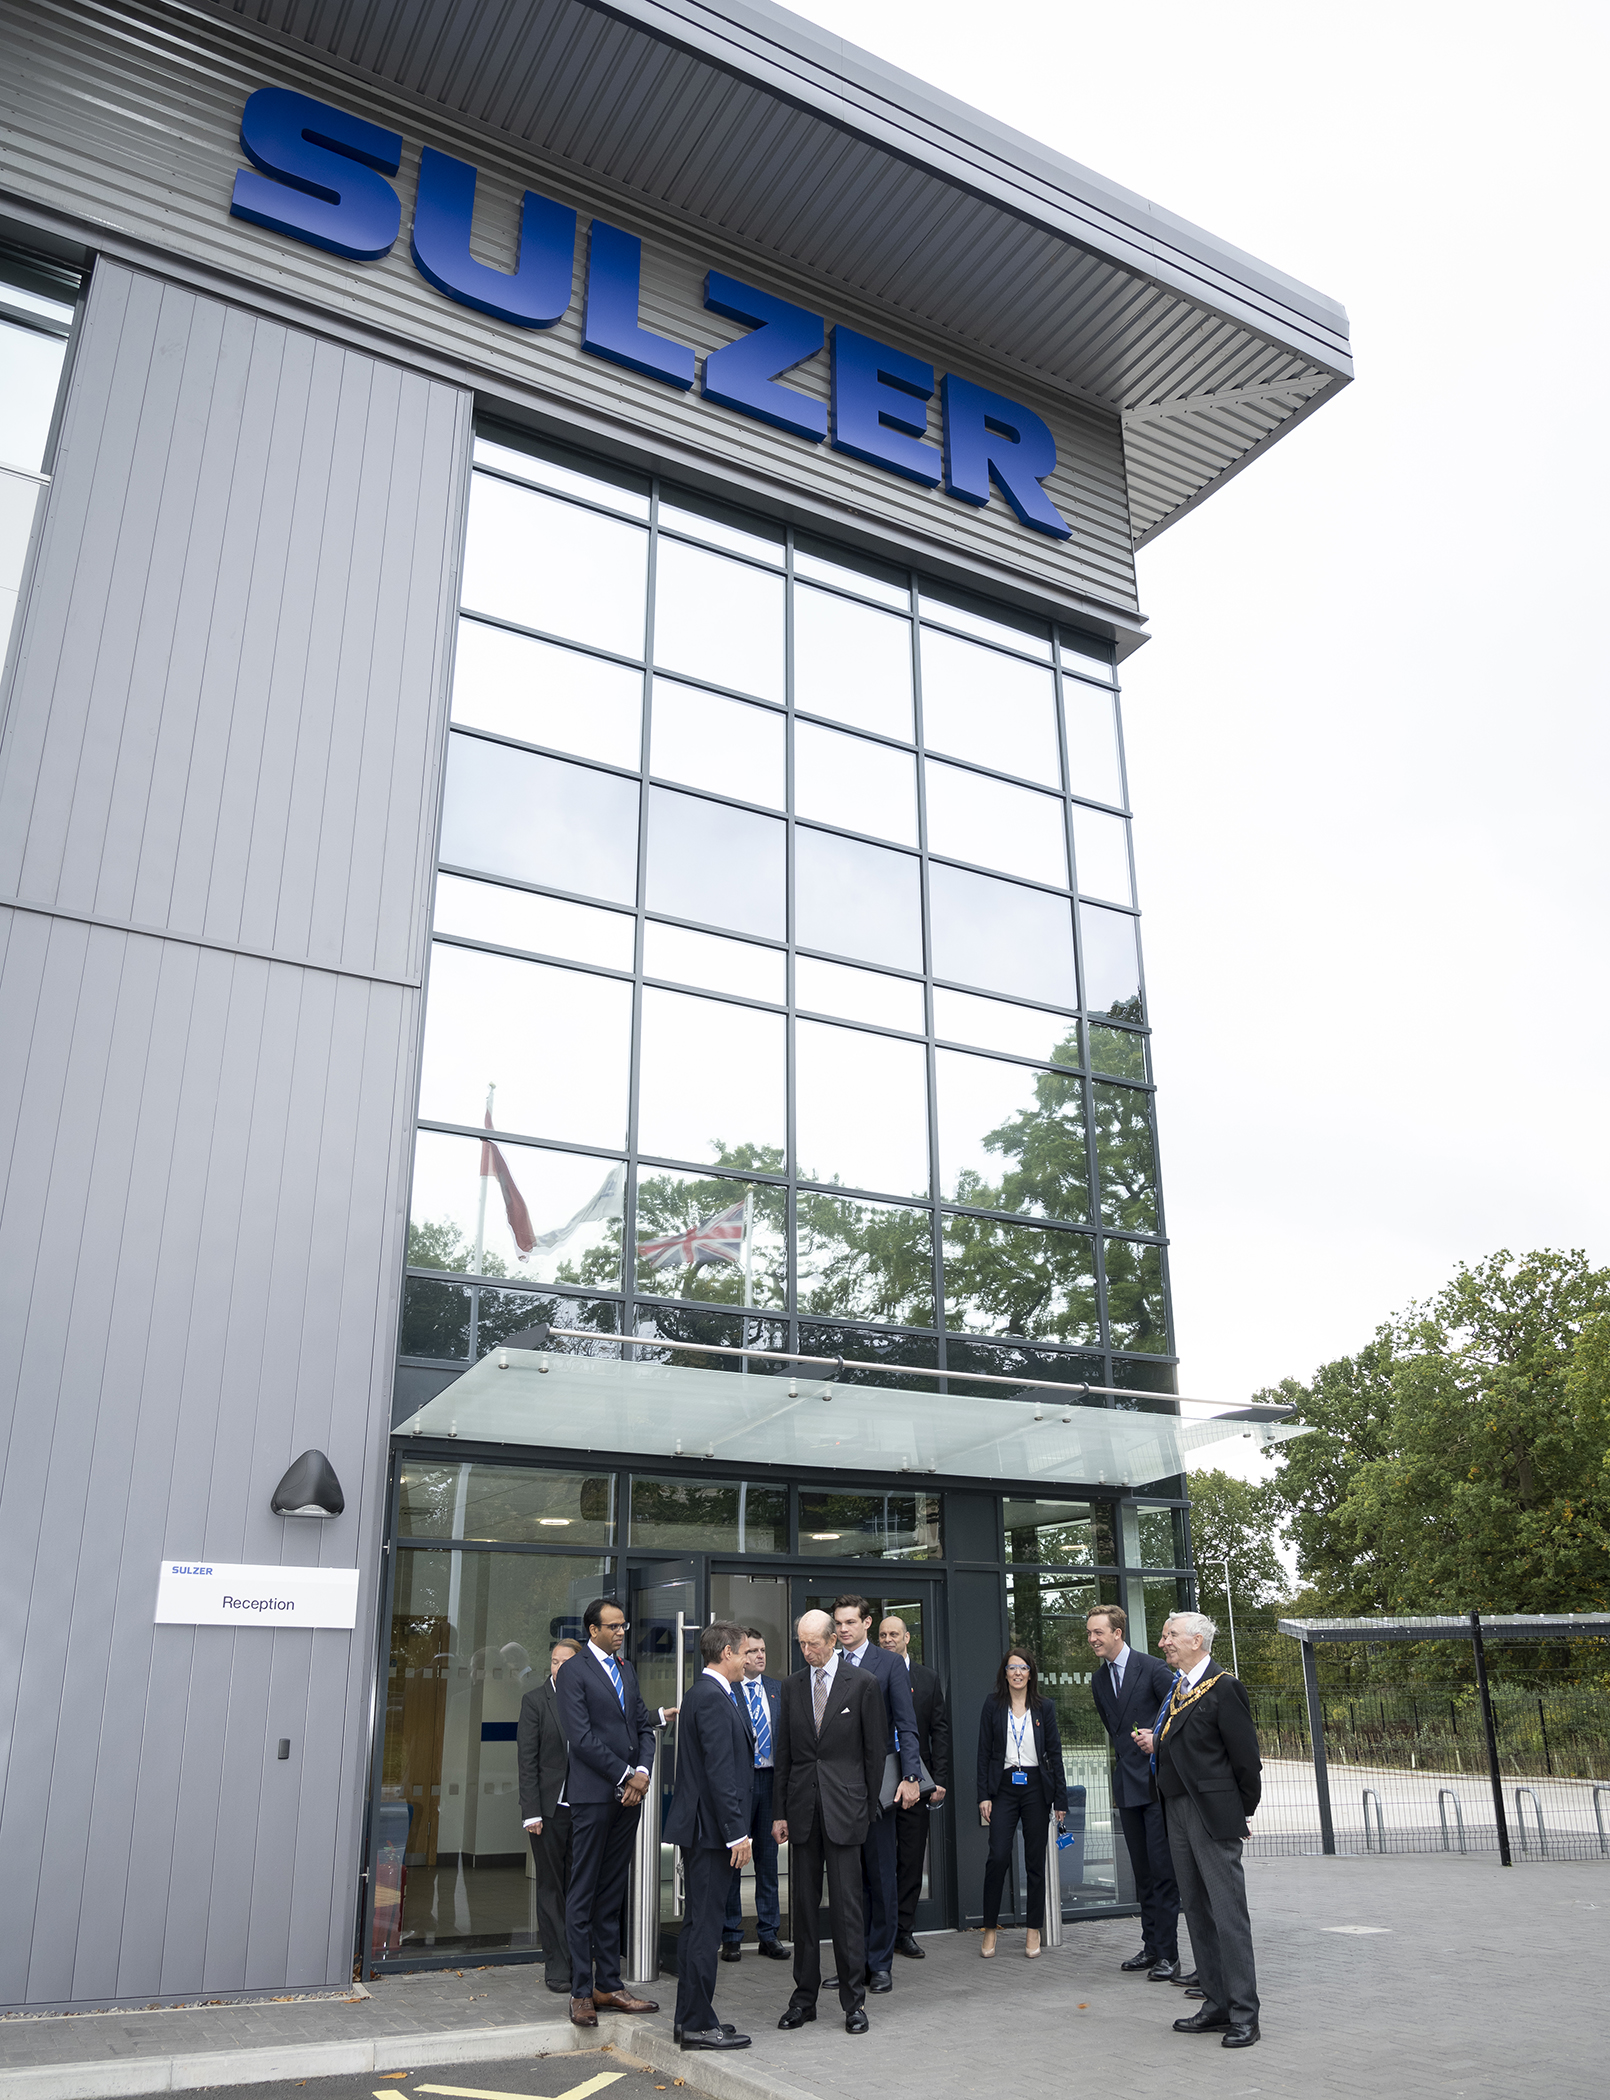 Sulzer’s new Birmingham Service Centre was officially opened by His Royal Highness The Duke of Kent.